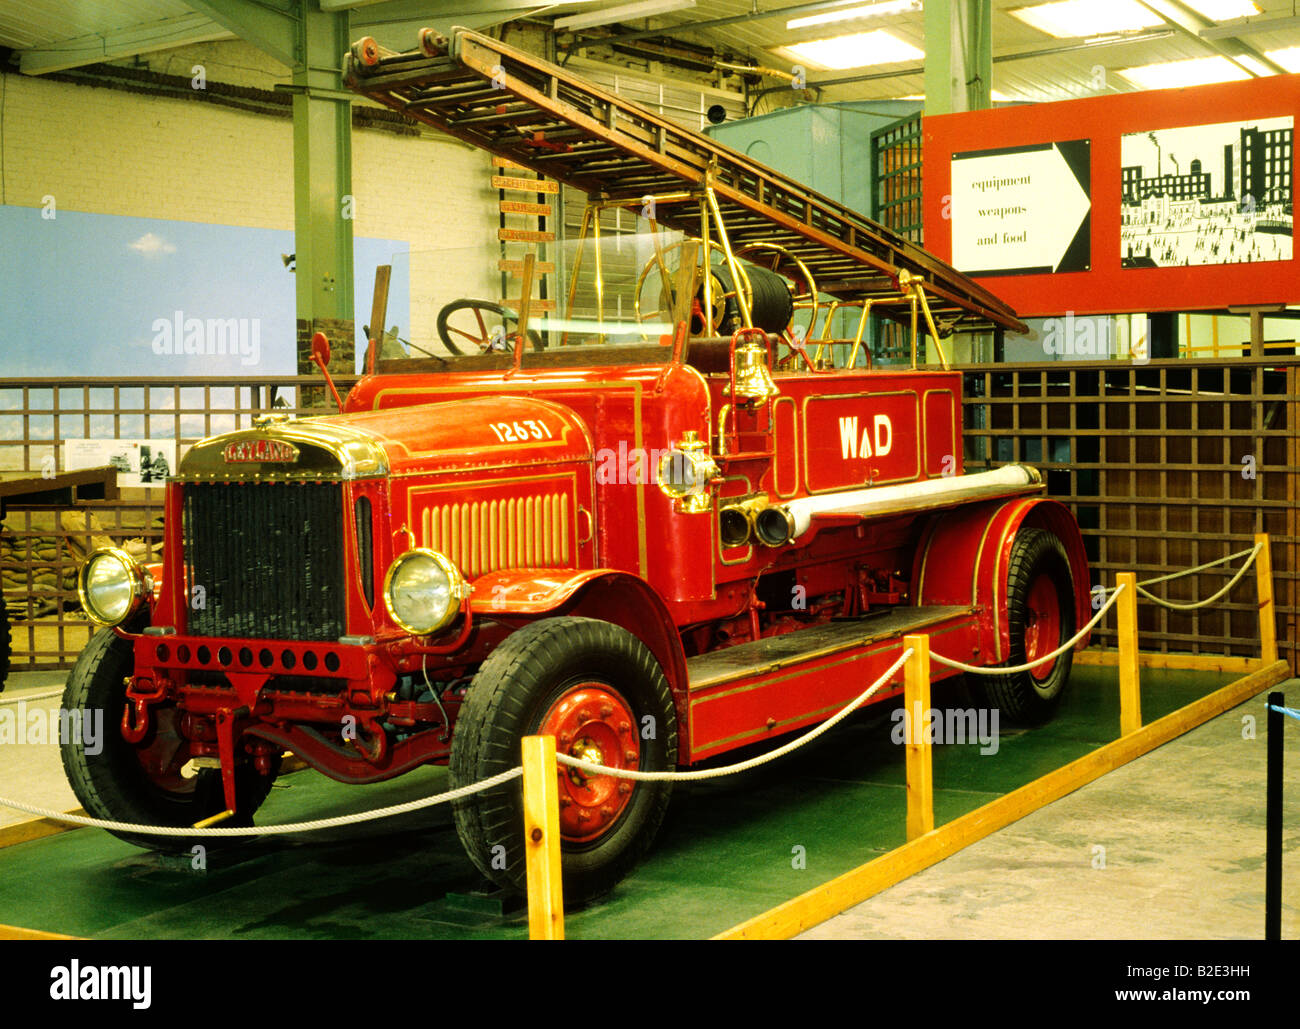 W D Fire Engine 2nd World War time military equipment red fire fighting vintage vehicle appliance Beverley transport museum Stock Photo